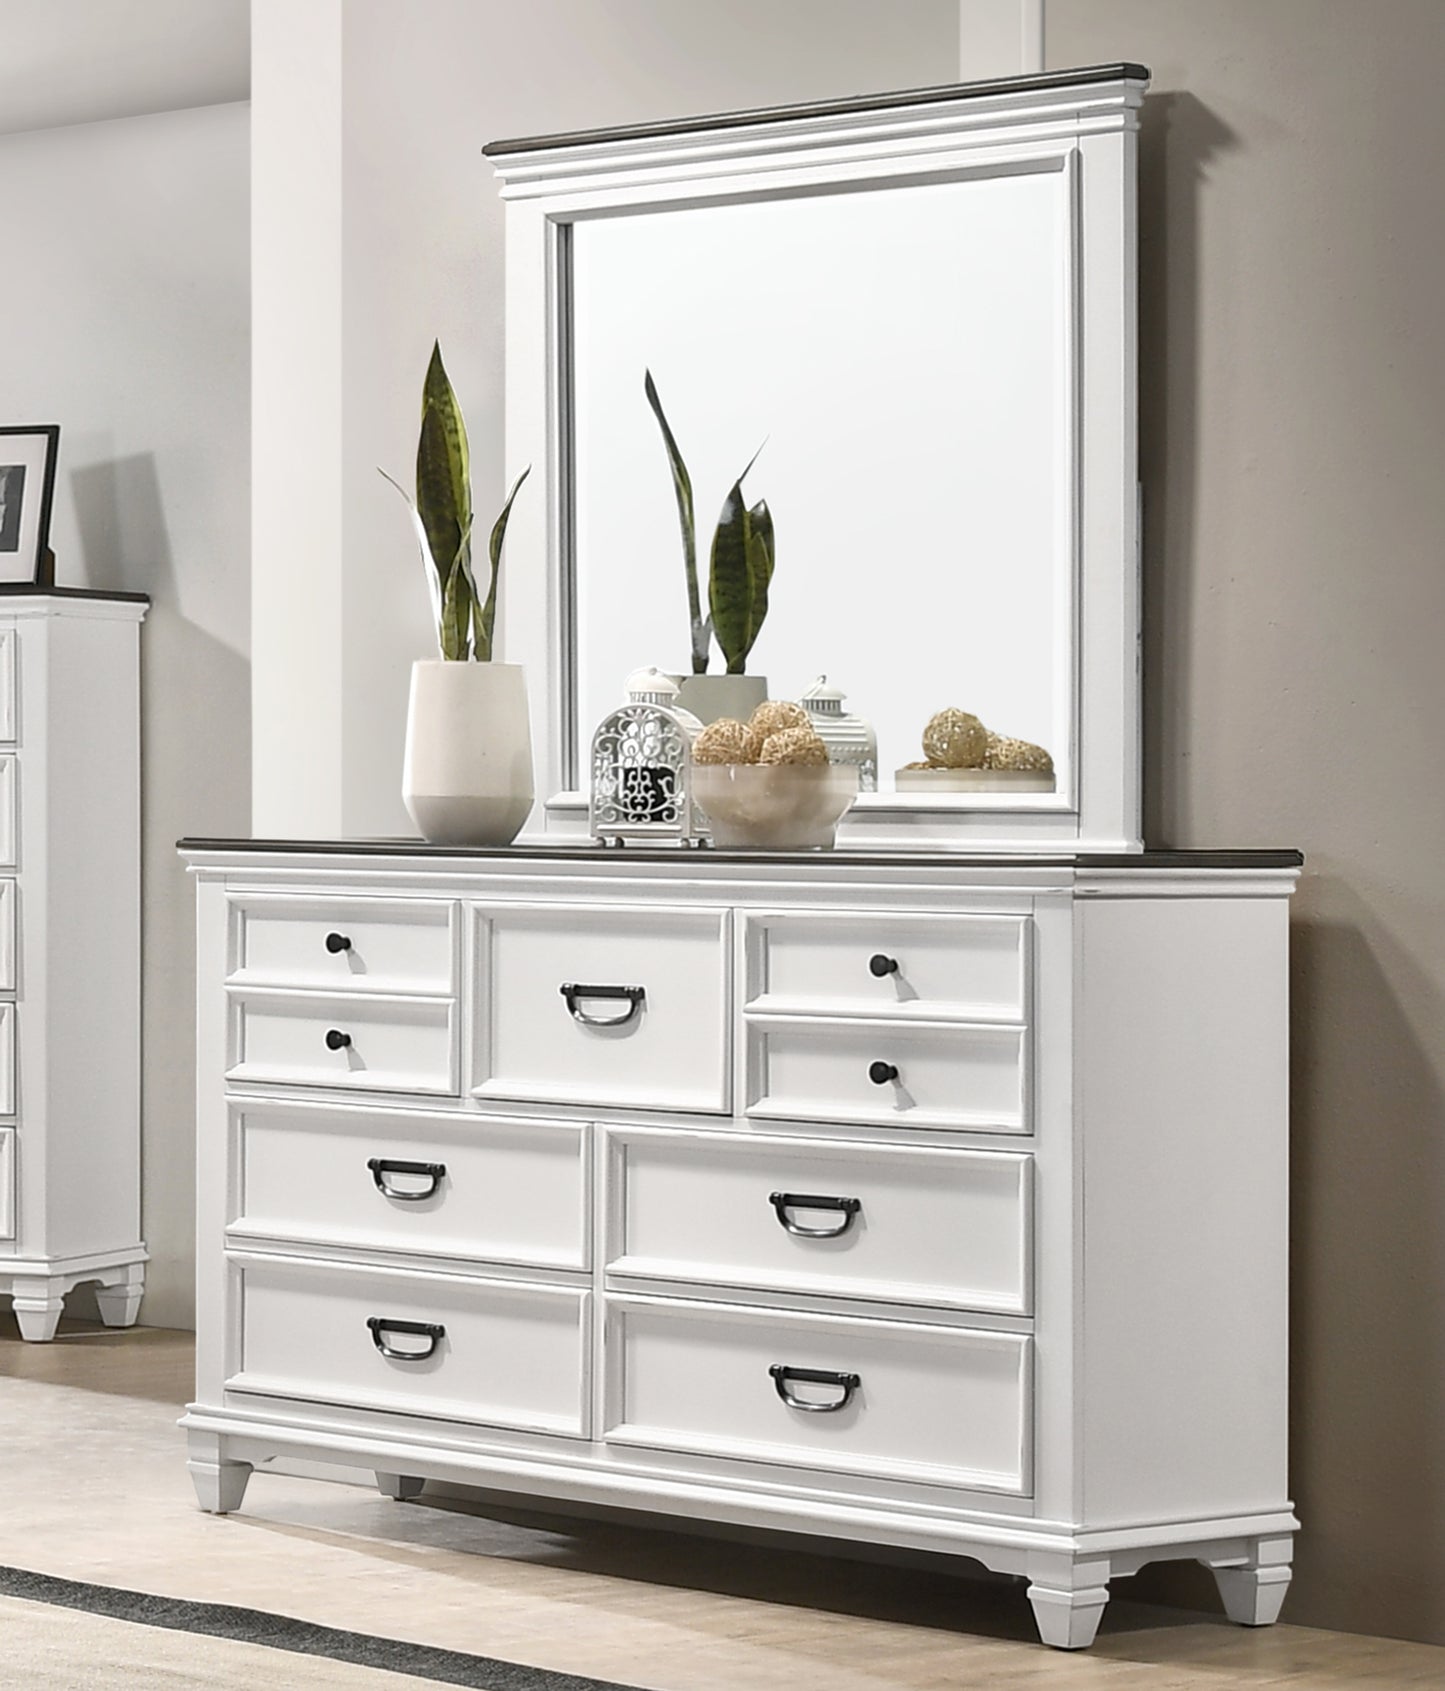 Clelane Wood 7-Drawer Dresser with Mirror, Weathered White and Gray